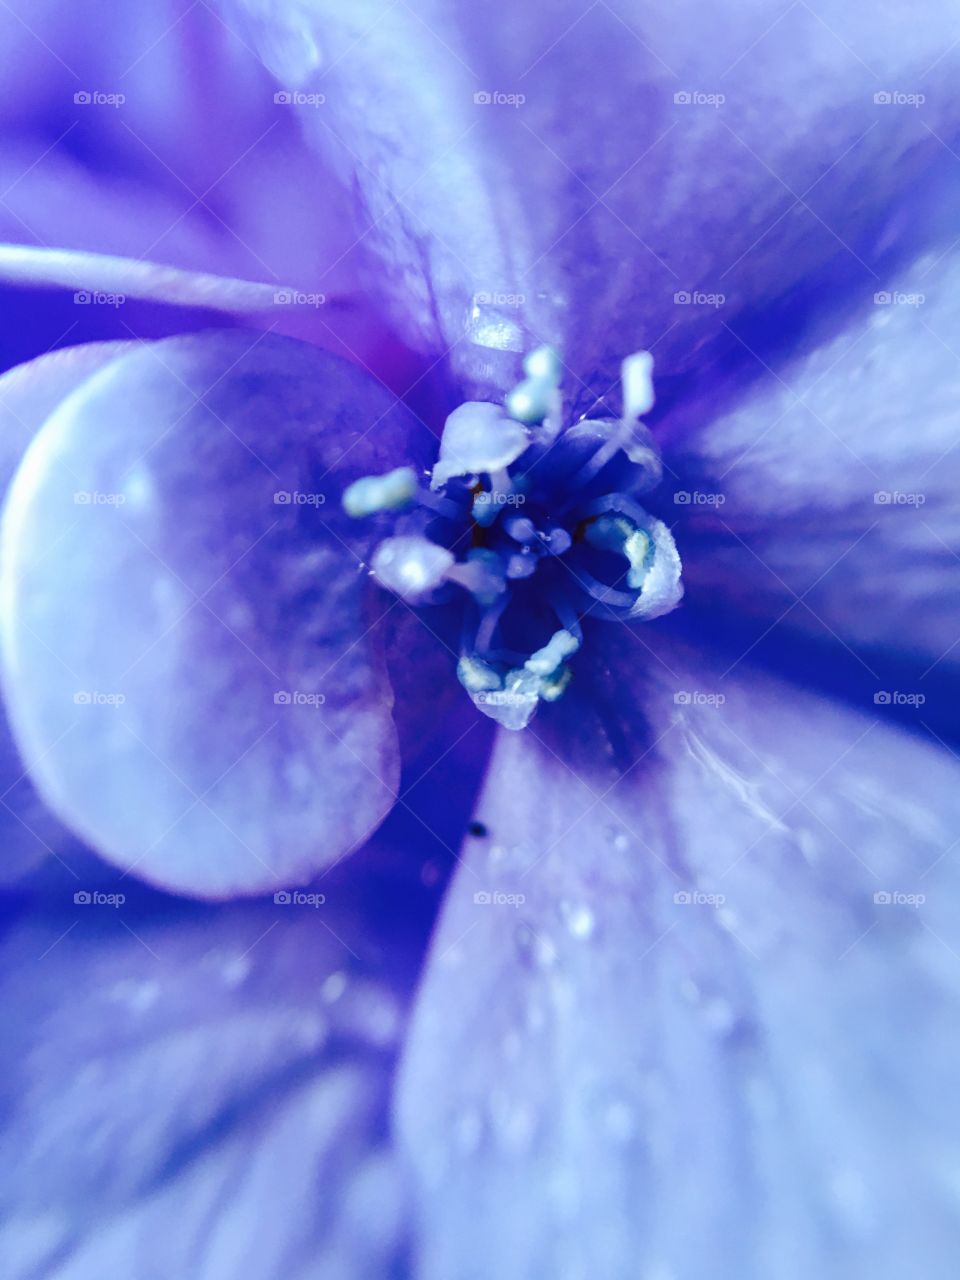 Raindrops on the pistil  and stamen of a purple flower.